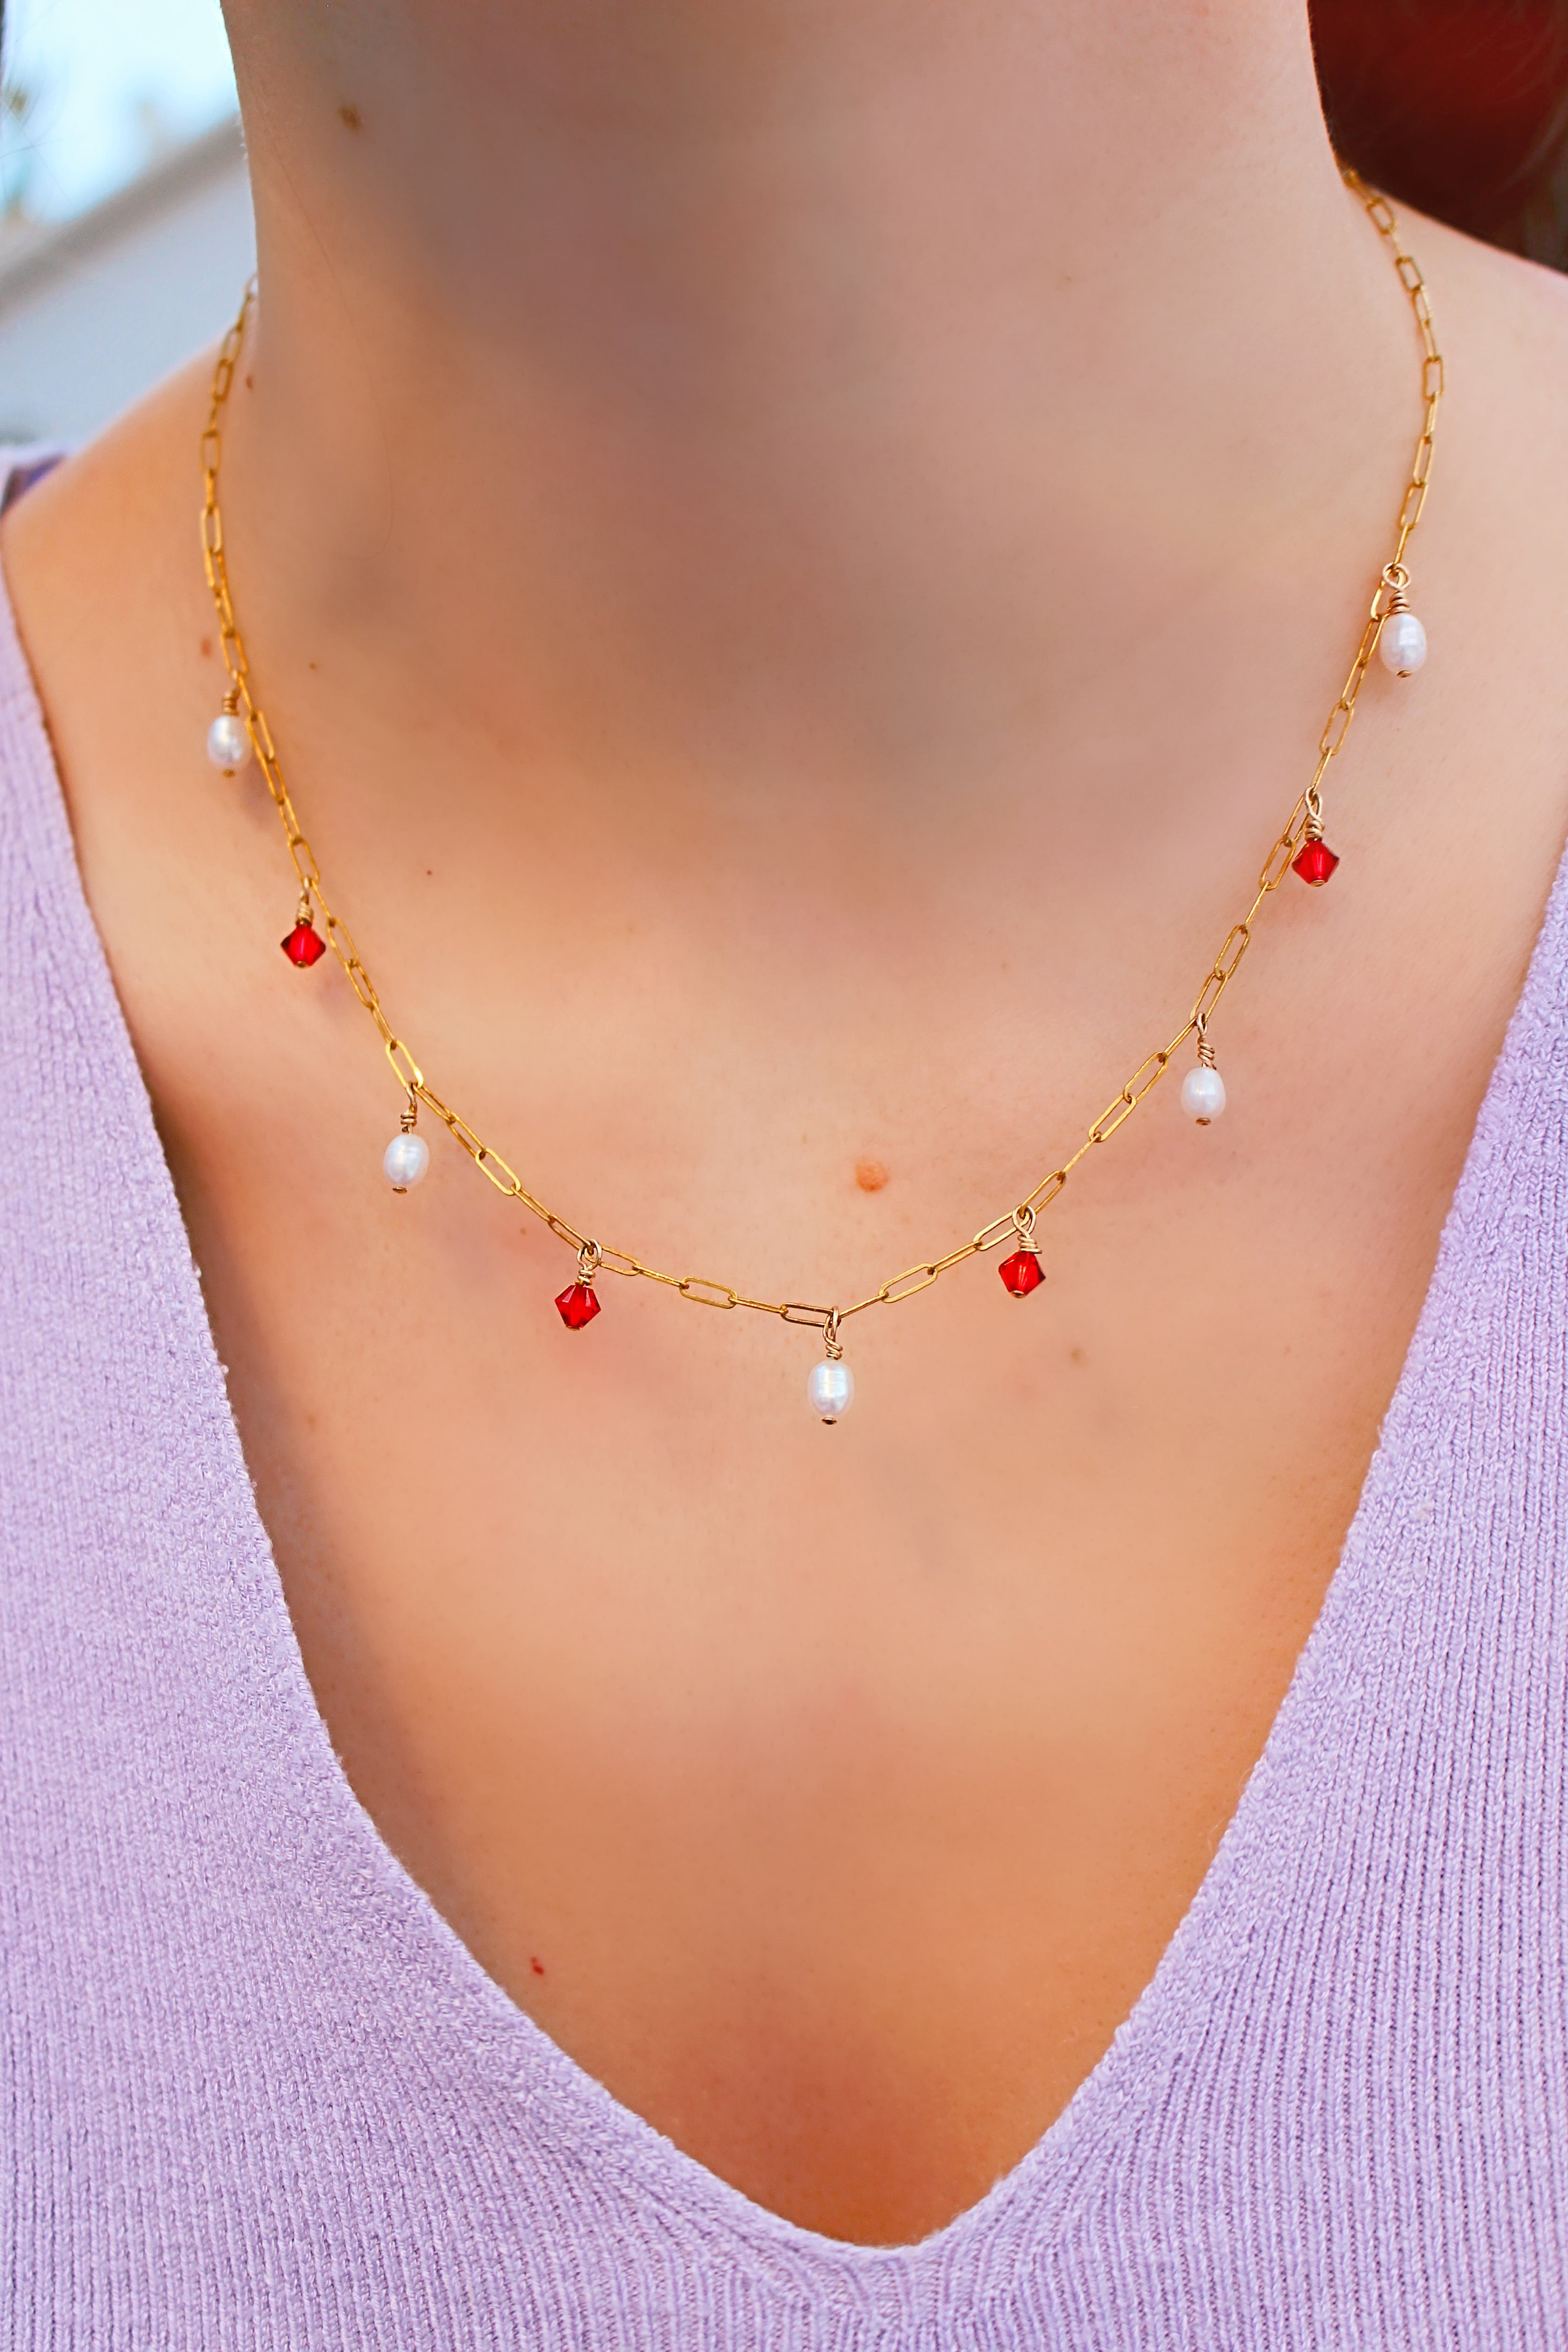 Lady wearing a lilac v-neck top wearing the Anastasia necklace, the frame is focused on the chest area to bring focus to the necklace. The necklace is a gold filled satelite chain with five pearls and four red swarovski crystals interchanging.